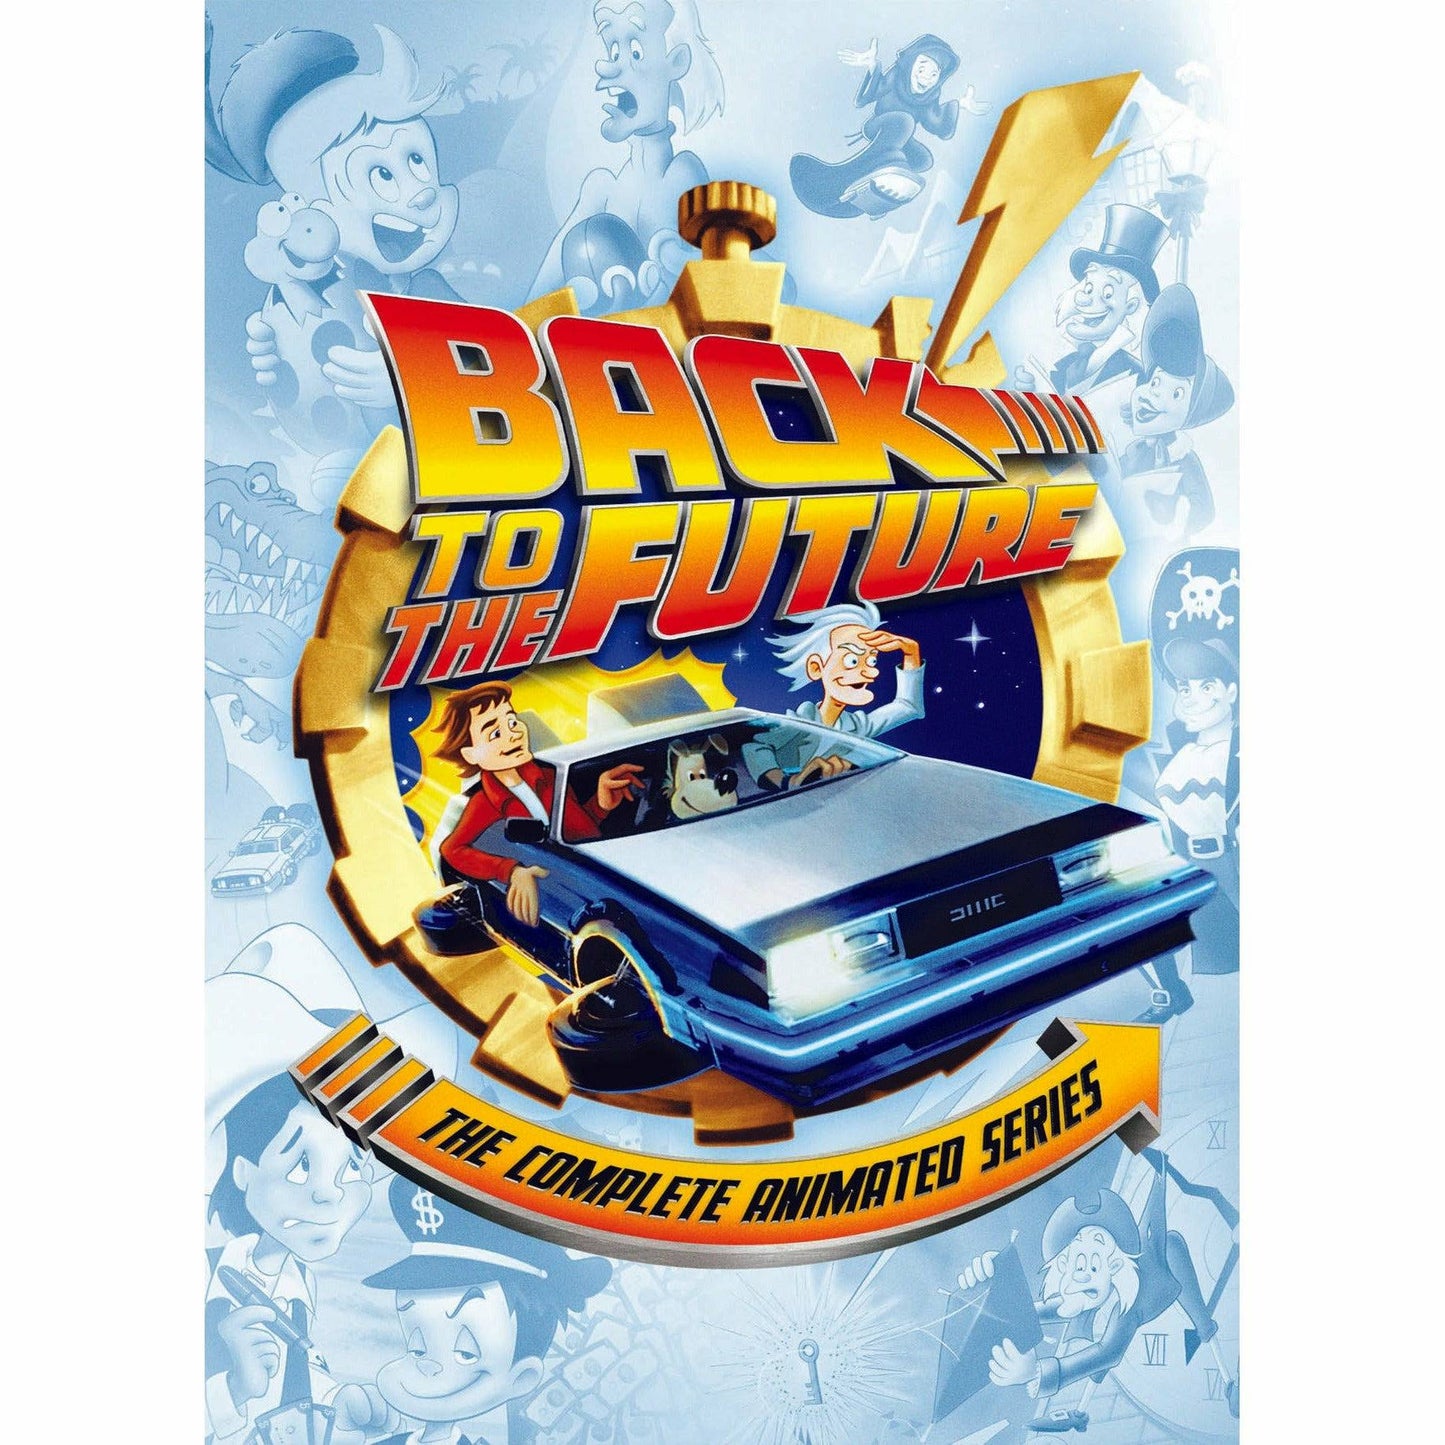 Back to the Future: The Complete Animated Series (DVD)